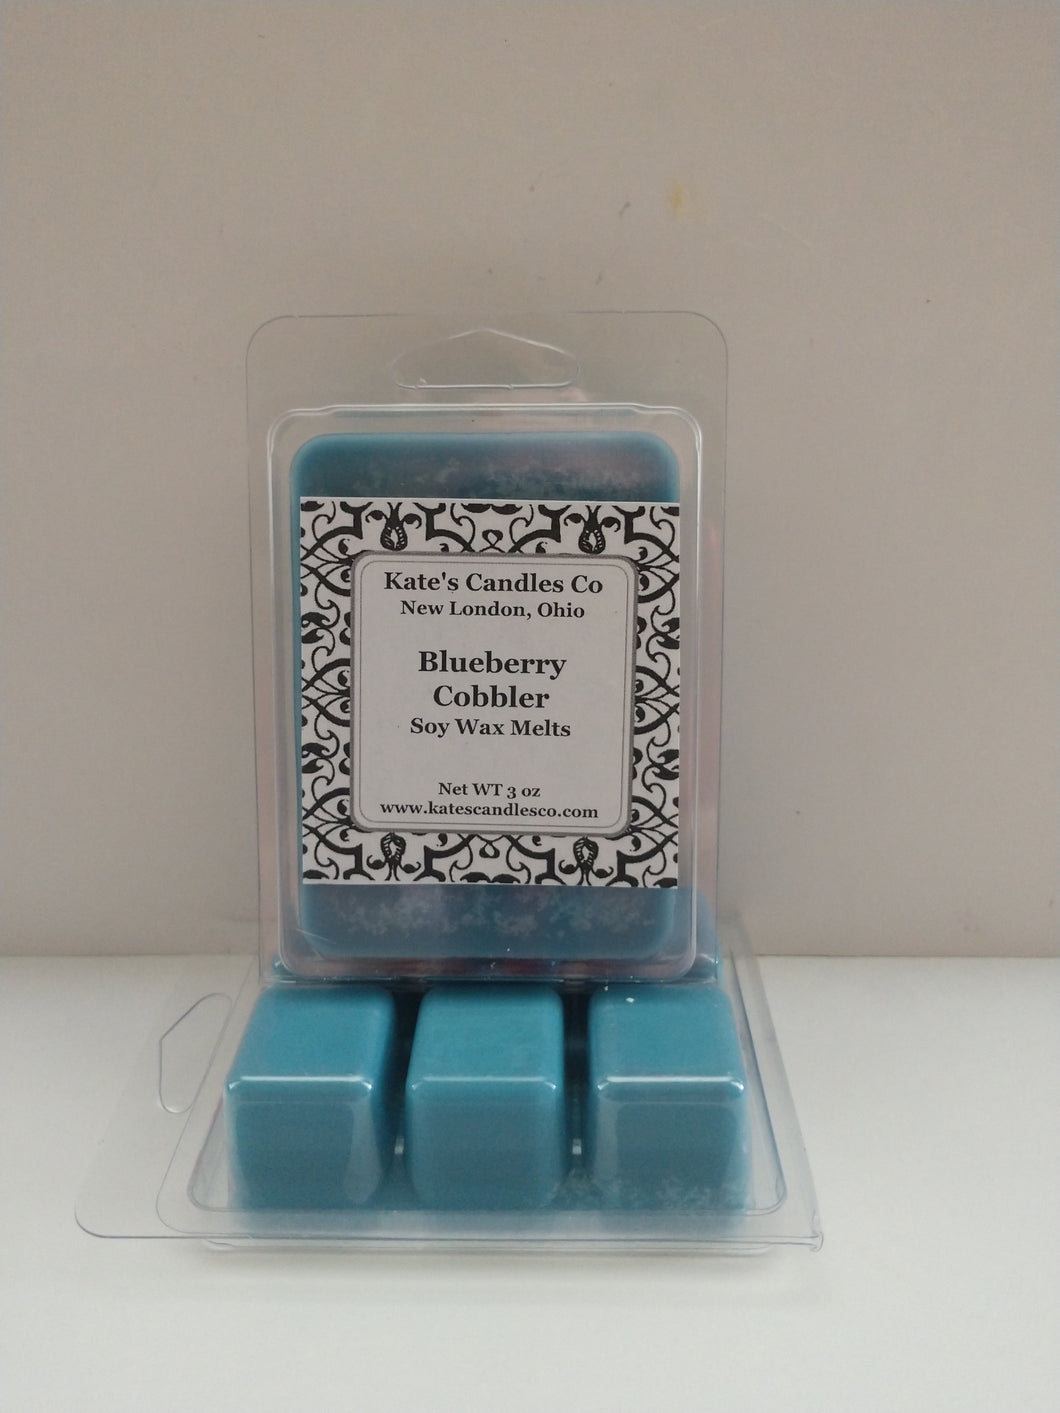 Blueberry Cobbler Soy Wax Melts - Kate's Candles Co. Soy Candles